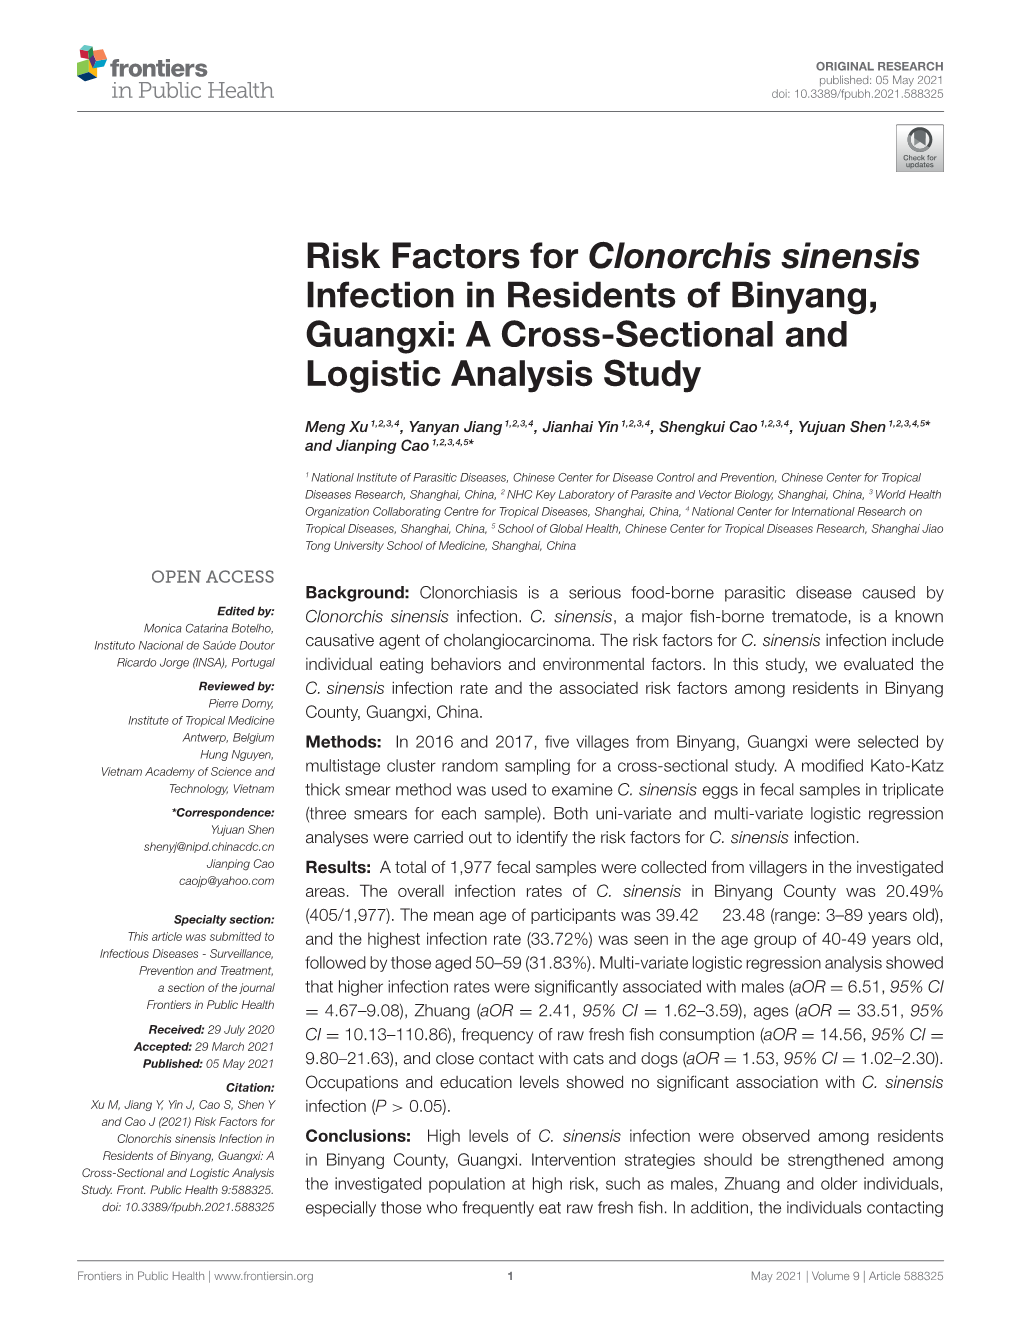 Risk Factors for Clonorchis Sinensis Infection in Residents of Binyang, Guangxi: a Cross-Sectional and Logistic Analysis Study